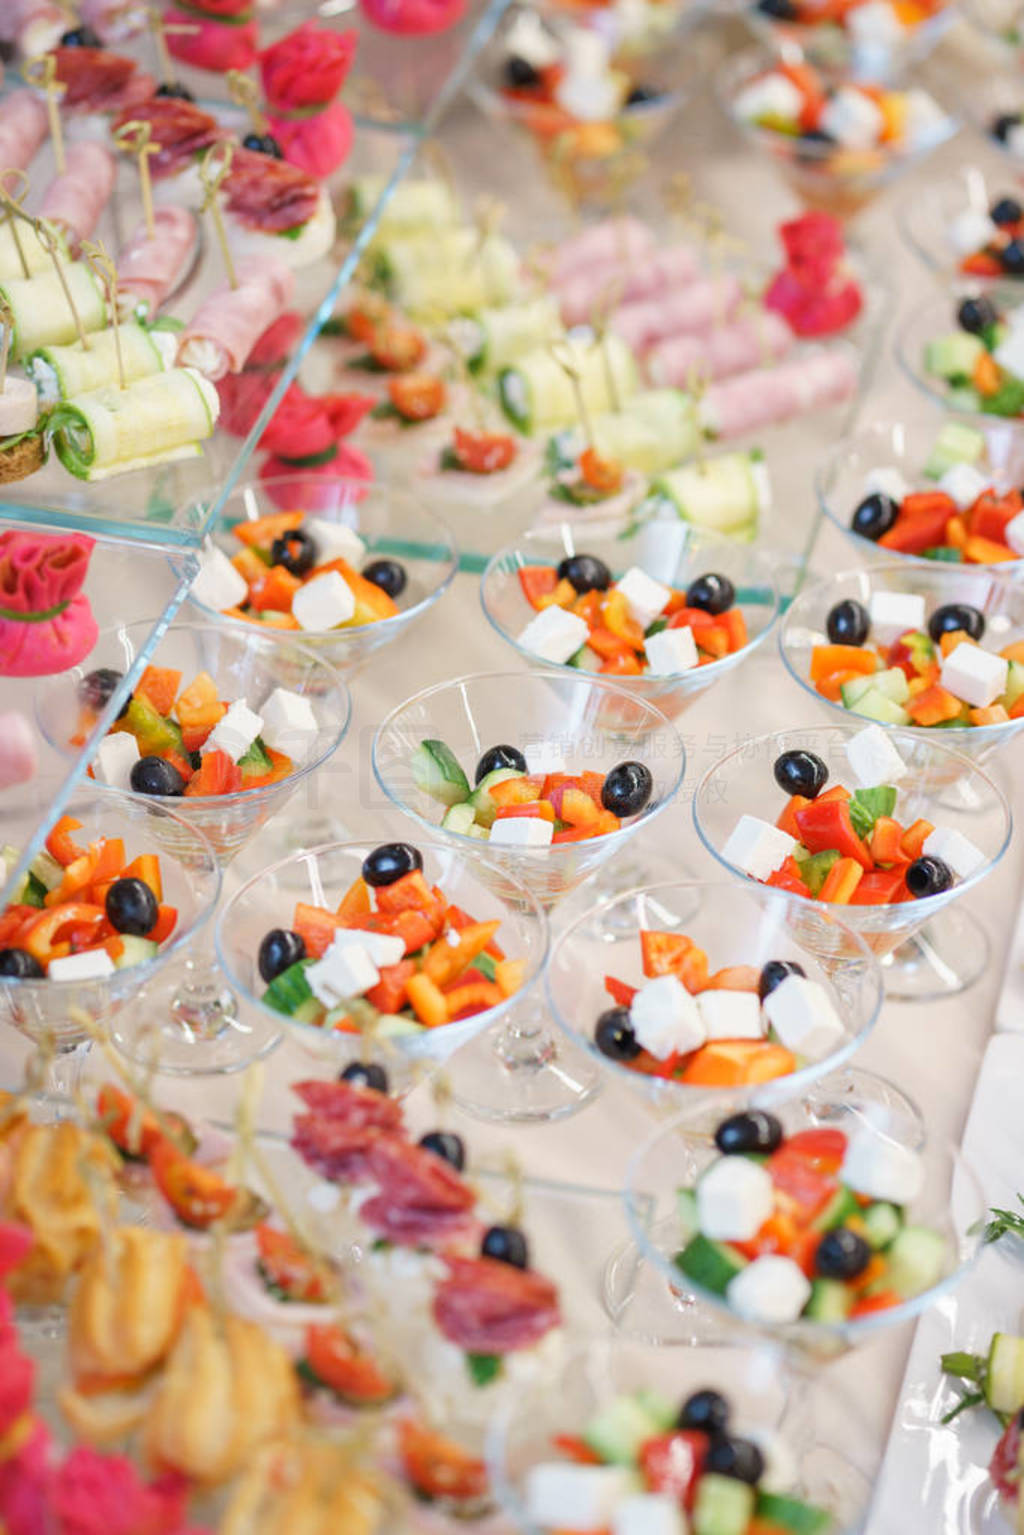 Catering and guest meals during the event. Quick mini snacks in